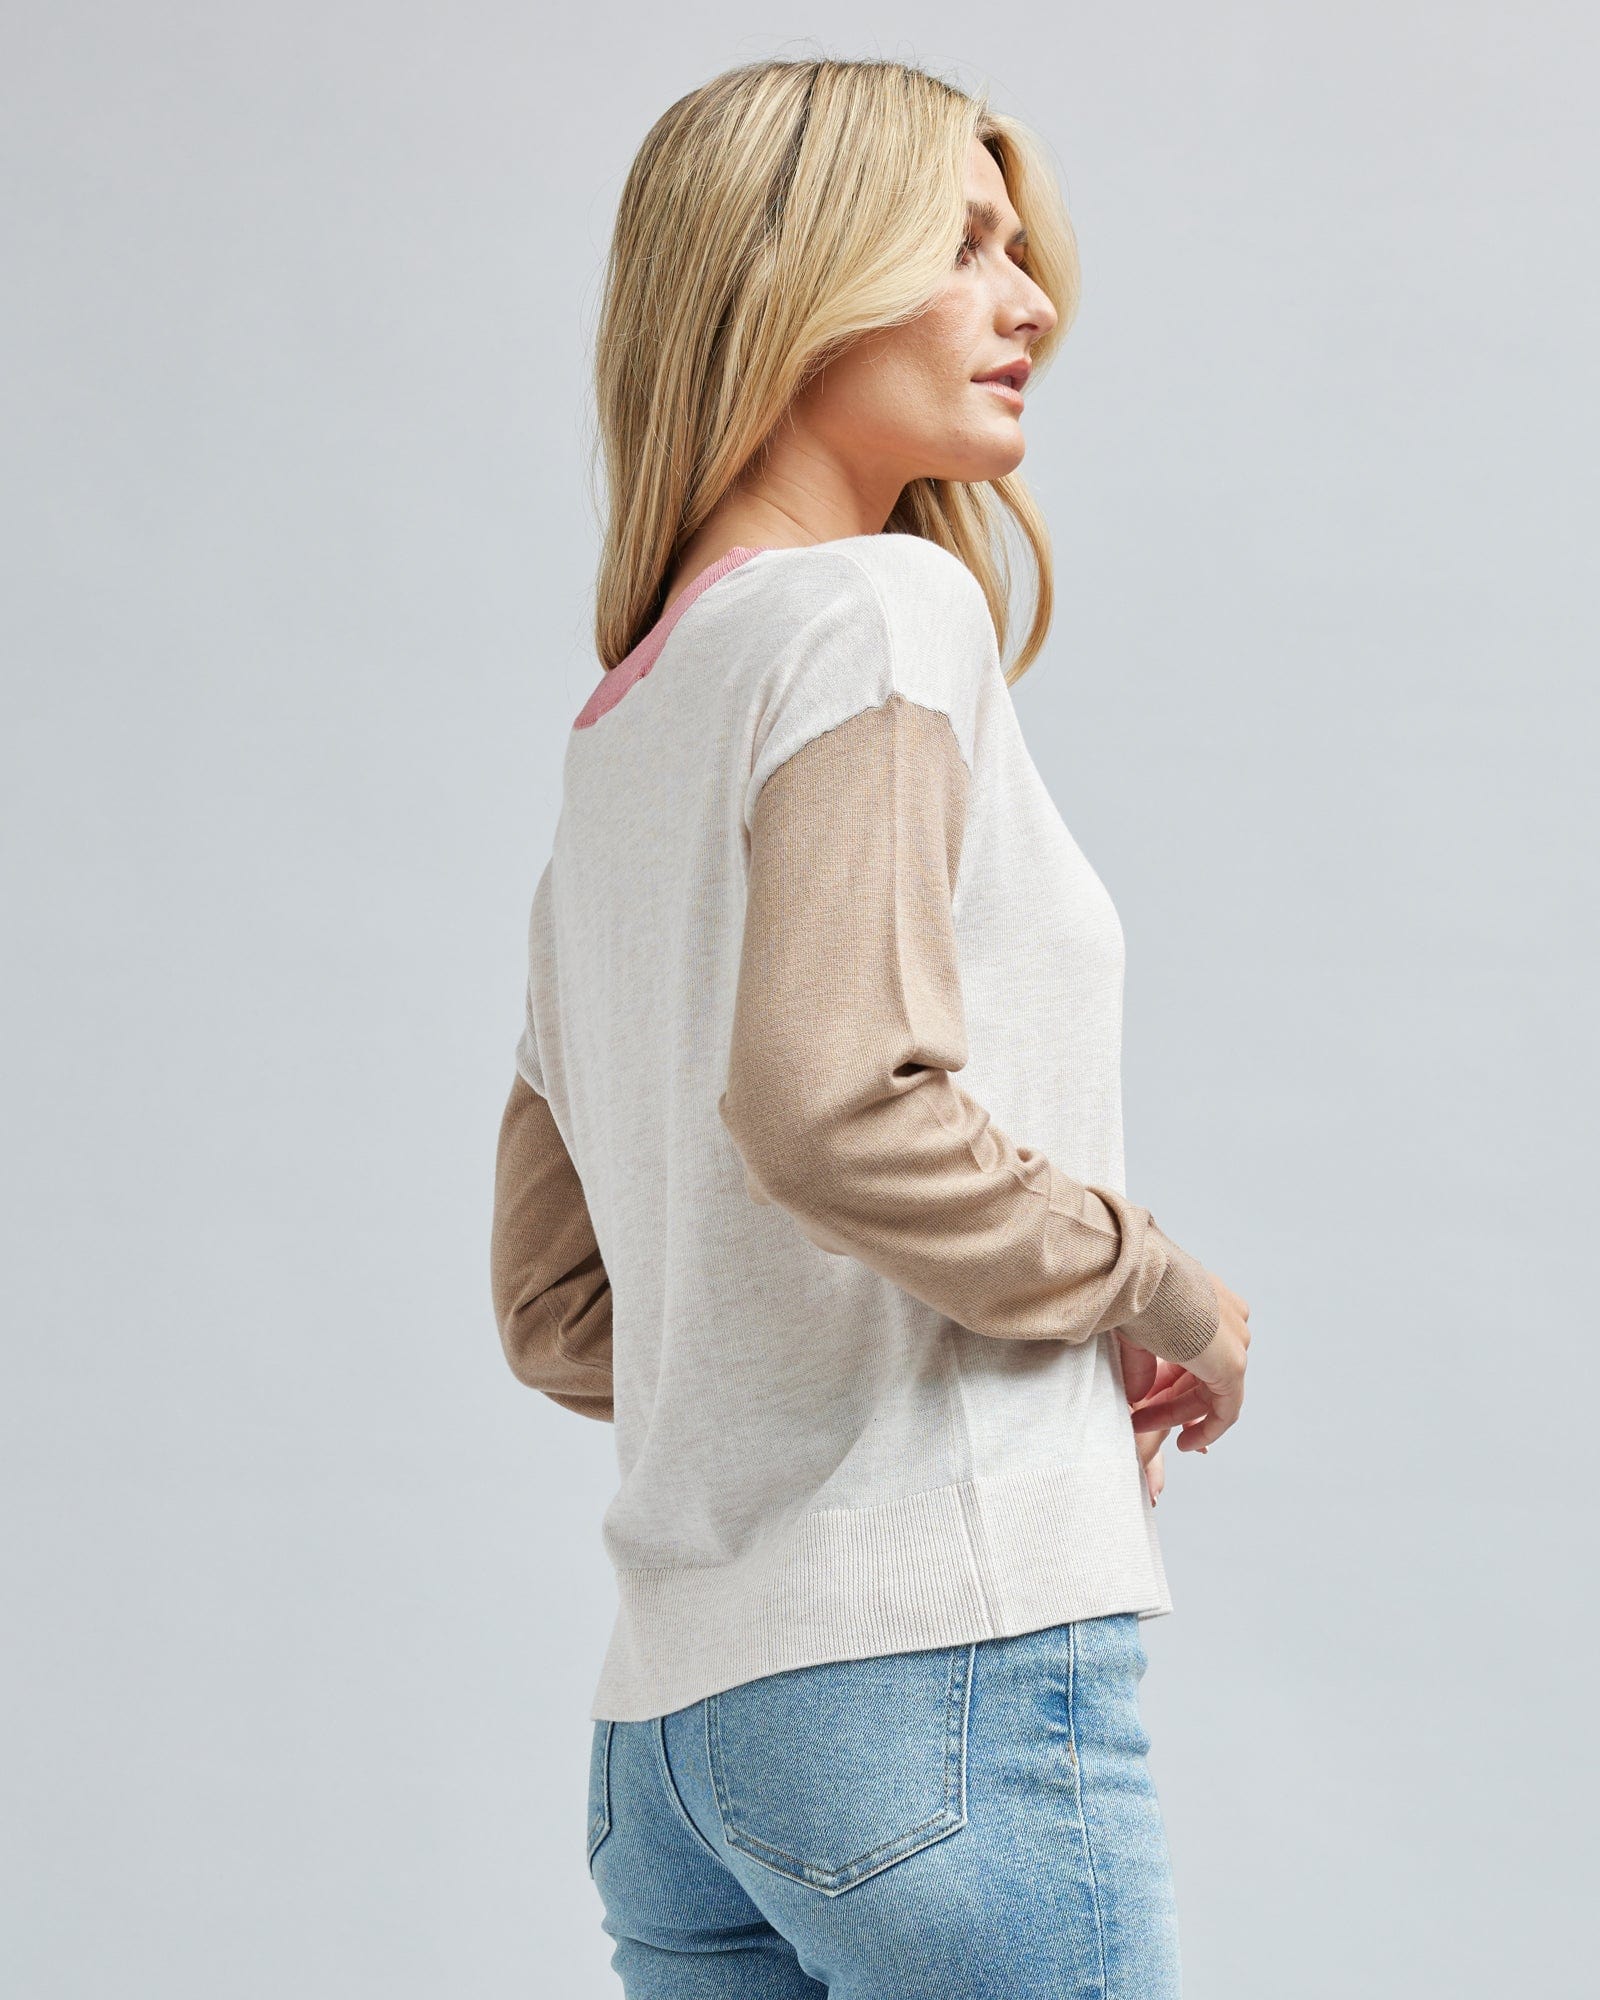 Woman in a tan and white color blocked long sleeve sweater.